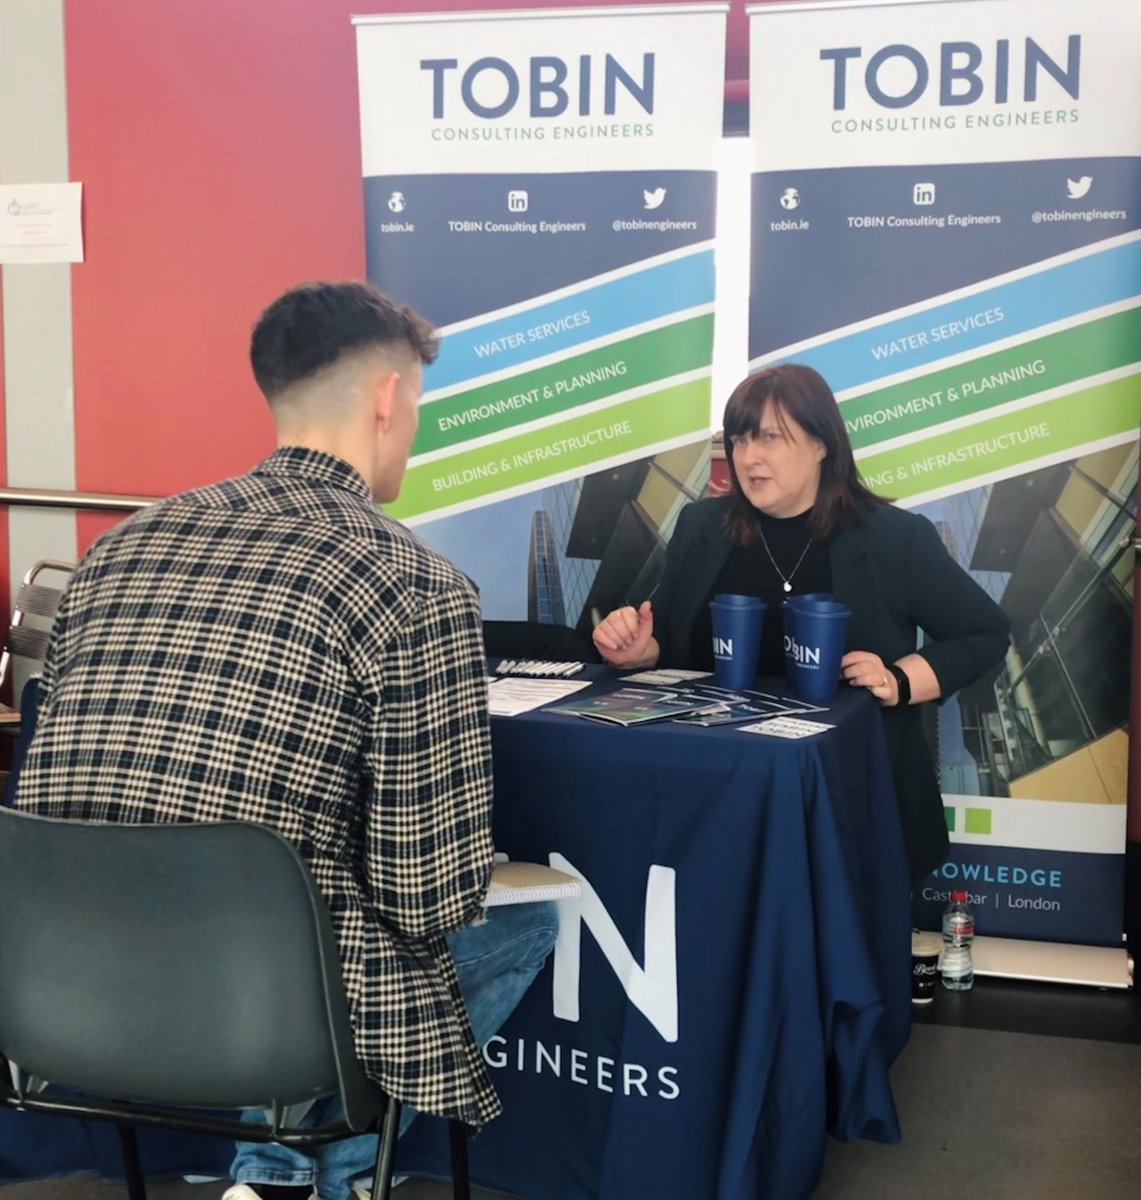 It was great meeting with #Engineering and #QuantitySurveying students attending the Careers Fair at @GMITOfficial.  

#TeamTOBIN #graduatecareers